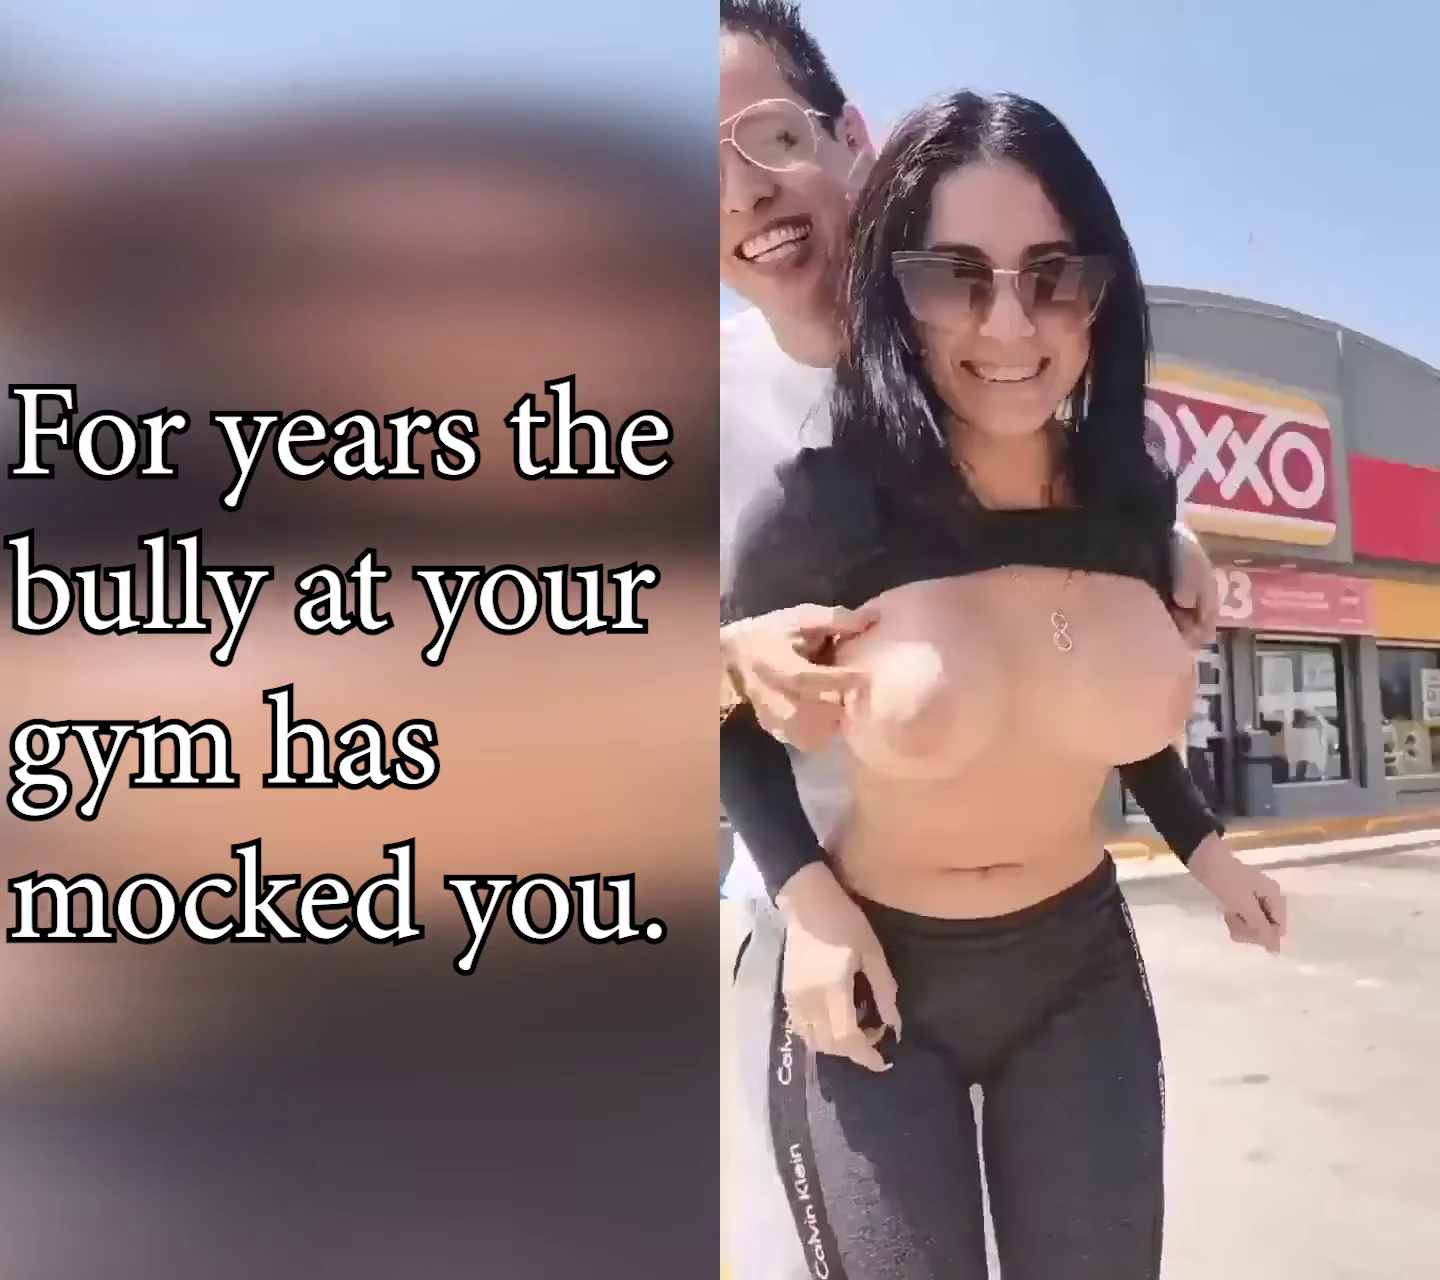 Video by CreampieCookies with the username @CreampieCookies,  March 31, 2020 at 7:23 PM. The post is about the topic Cuckold Captions and the text says 'a present from your bully'